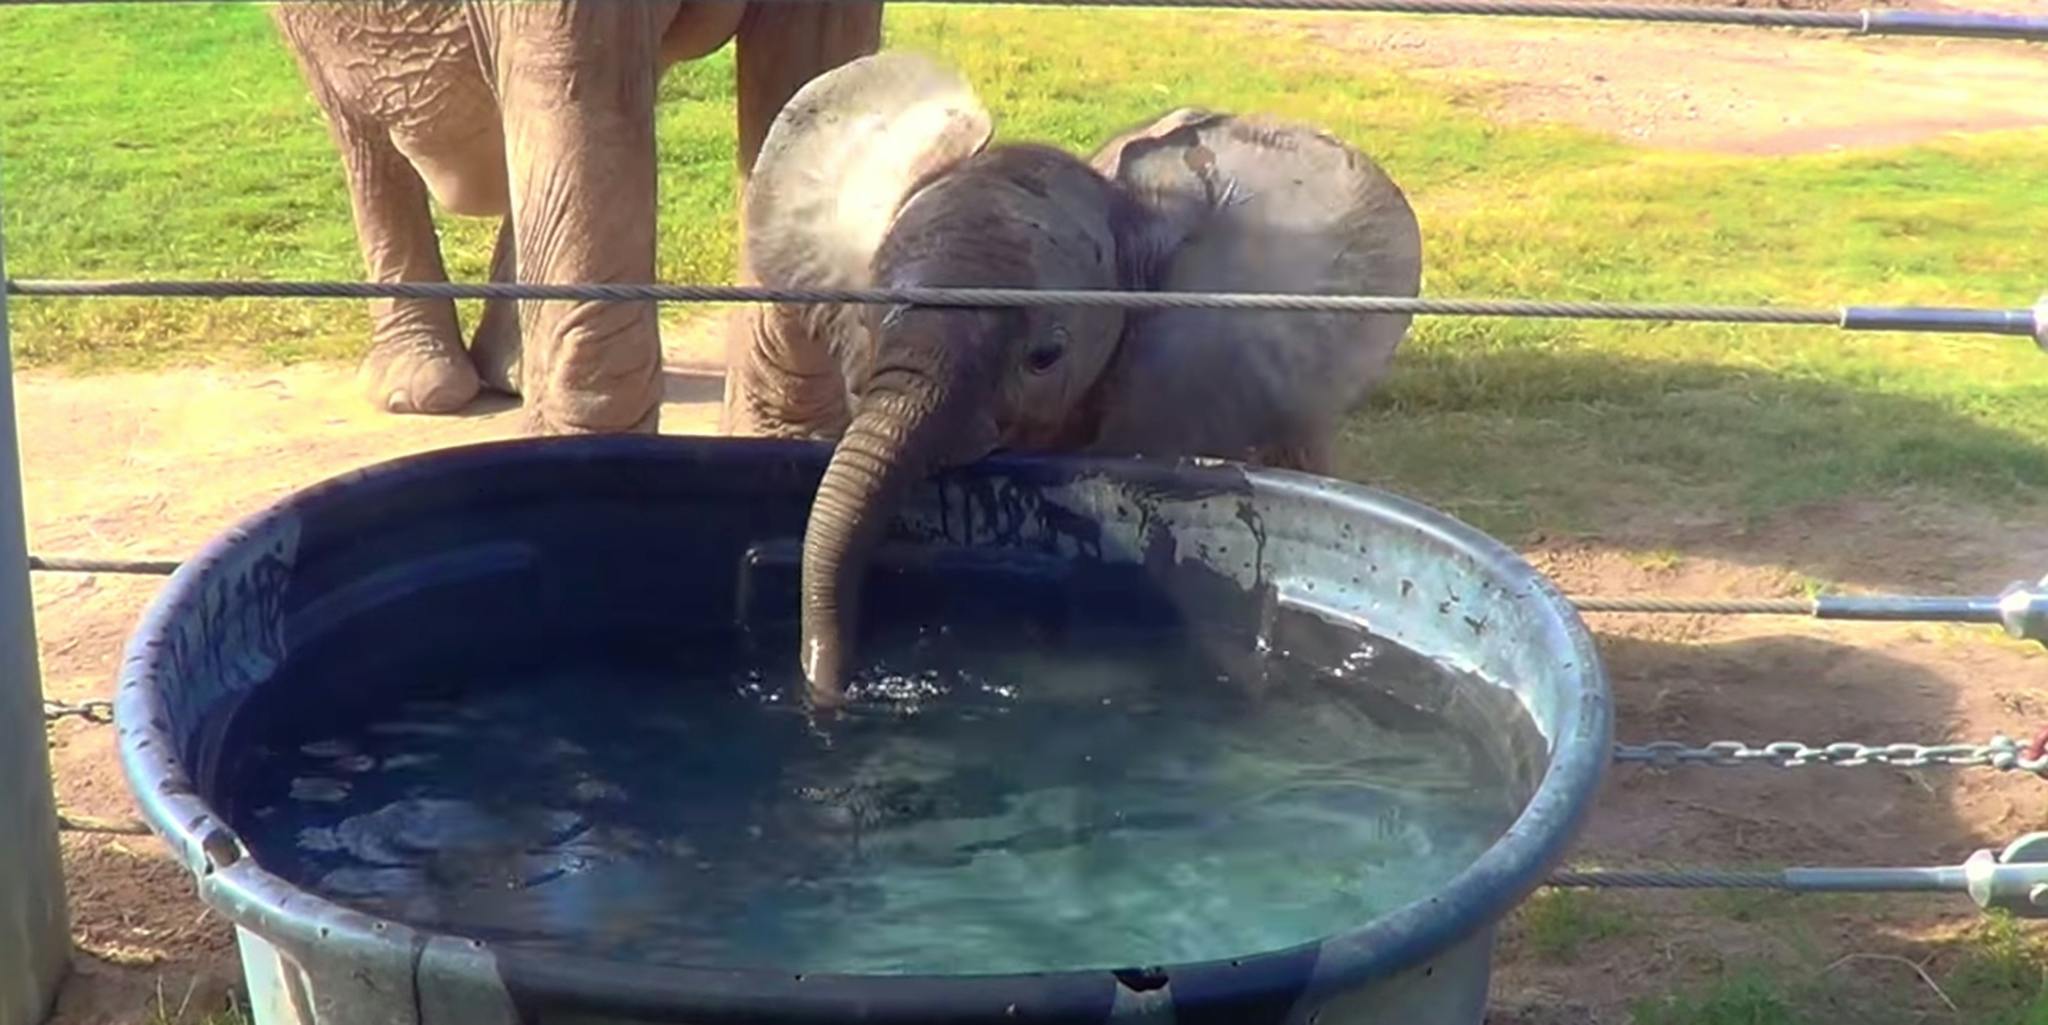 This baby elephant is having way too much fun blowing bubbles